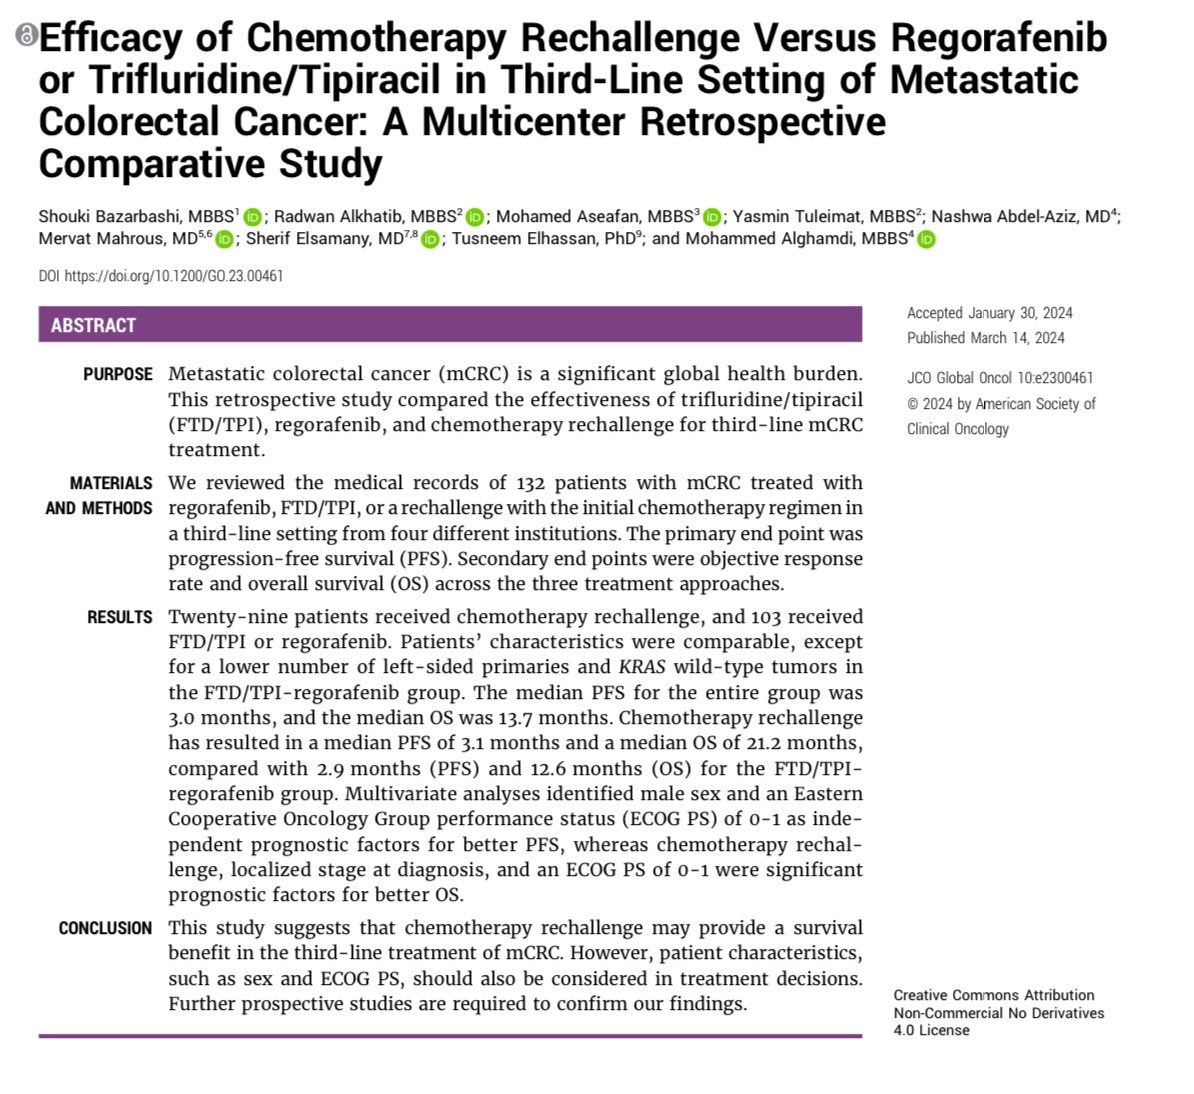 Glad to share our recent publication in @JCOGO_ASCO : A multicenter retrospective study that aims to compare the efficacy of chemotherapy rechallenge vs Regorafenib or FTD/TPI in third-line setting of metastatic colorectal cancer. #JCOGO Give it a read ➡️ ascopubs.org/doi/10.1200/GO…